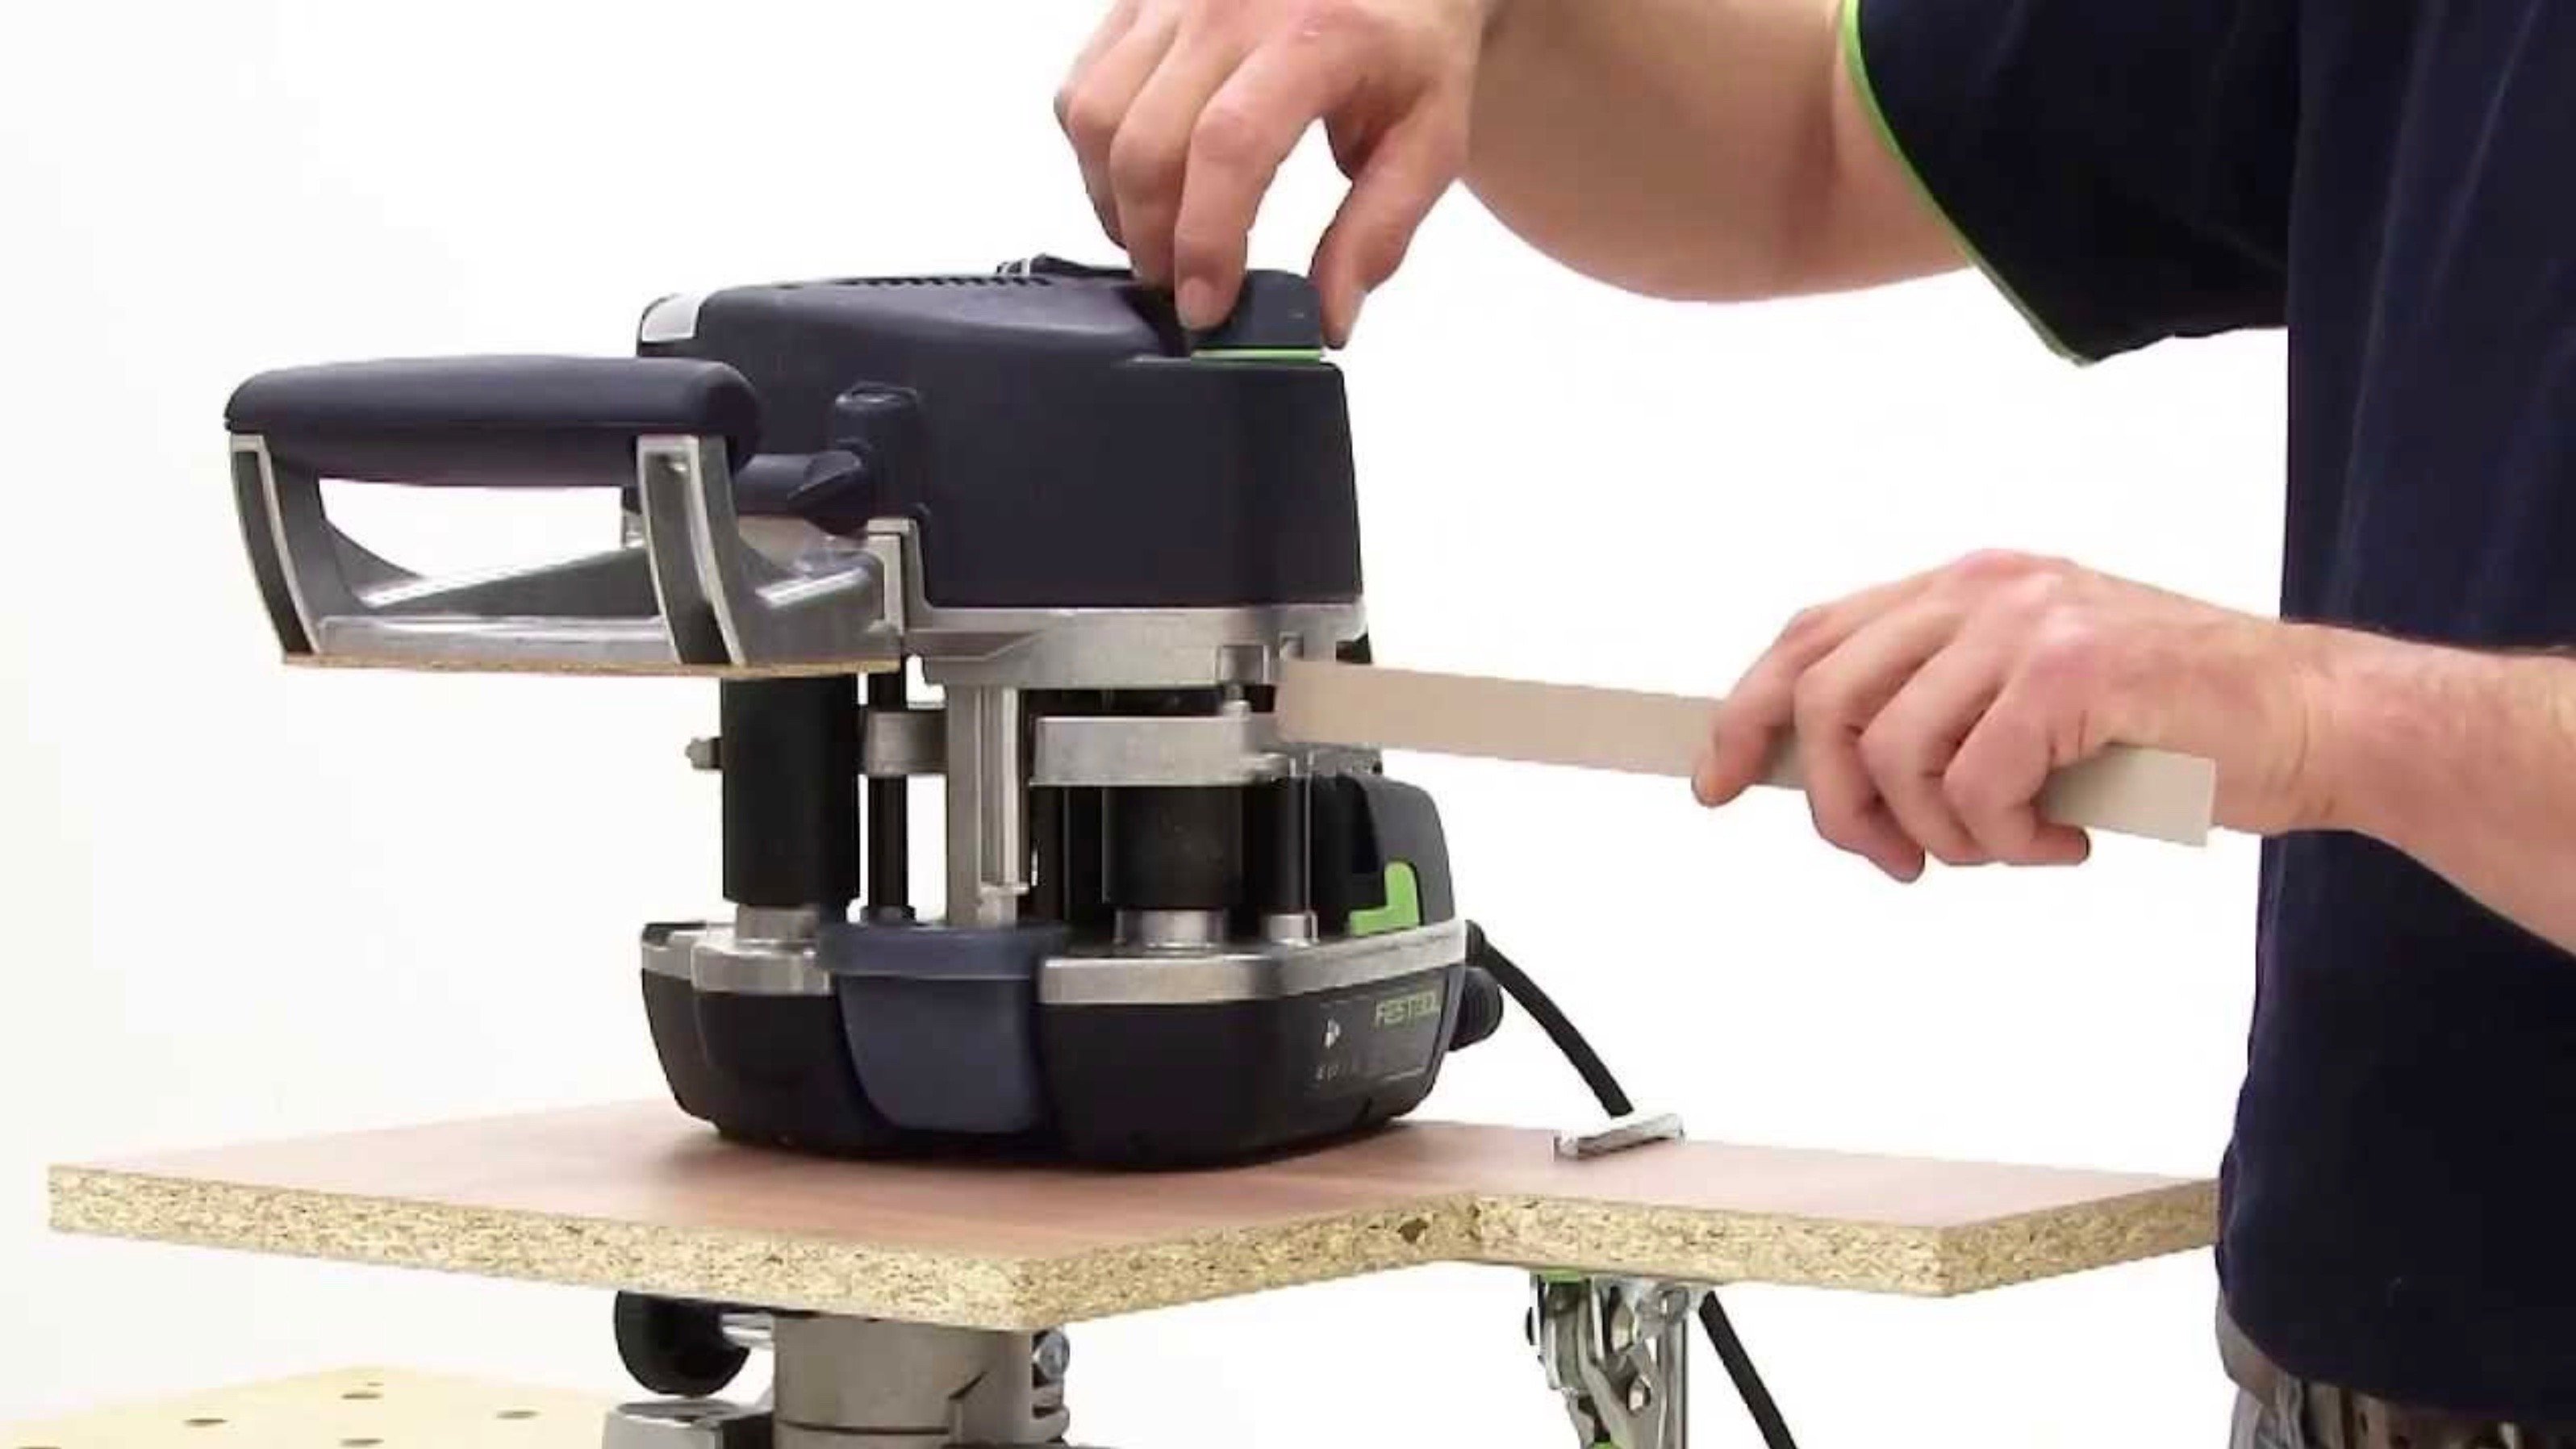 How the Festool Conturo Delivers the Perfect Edge, On-Site and In-Shop